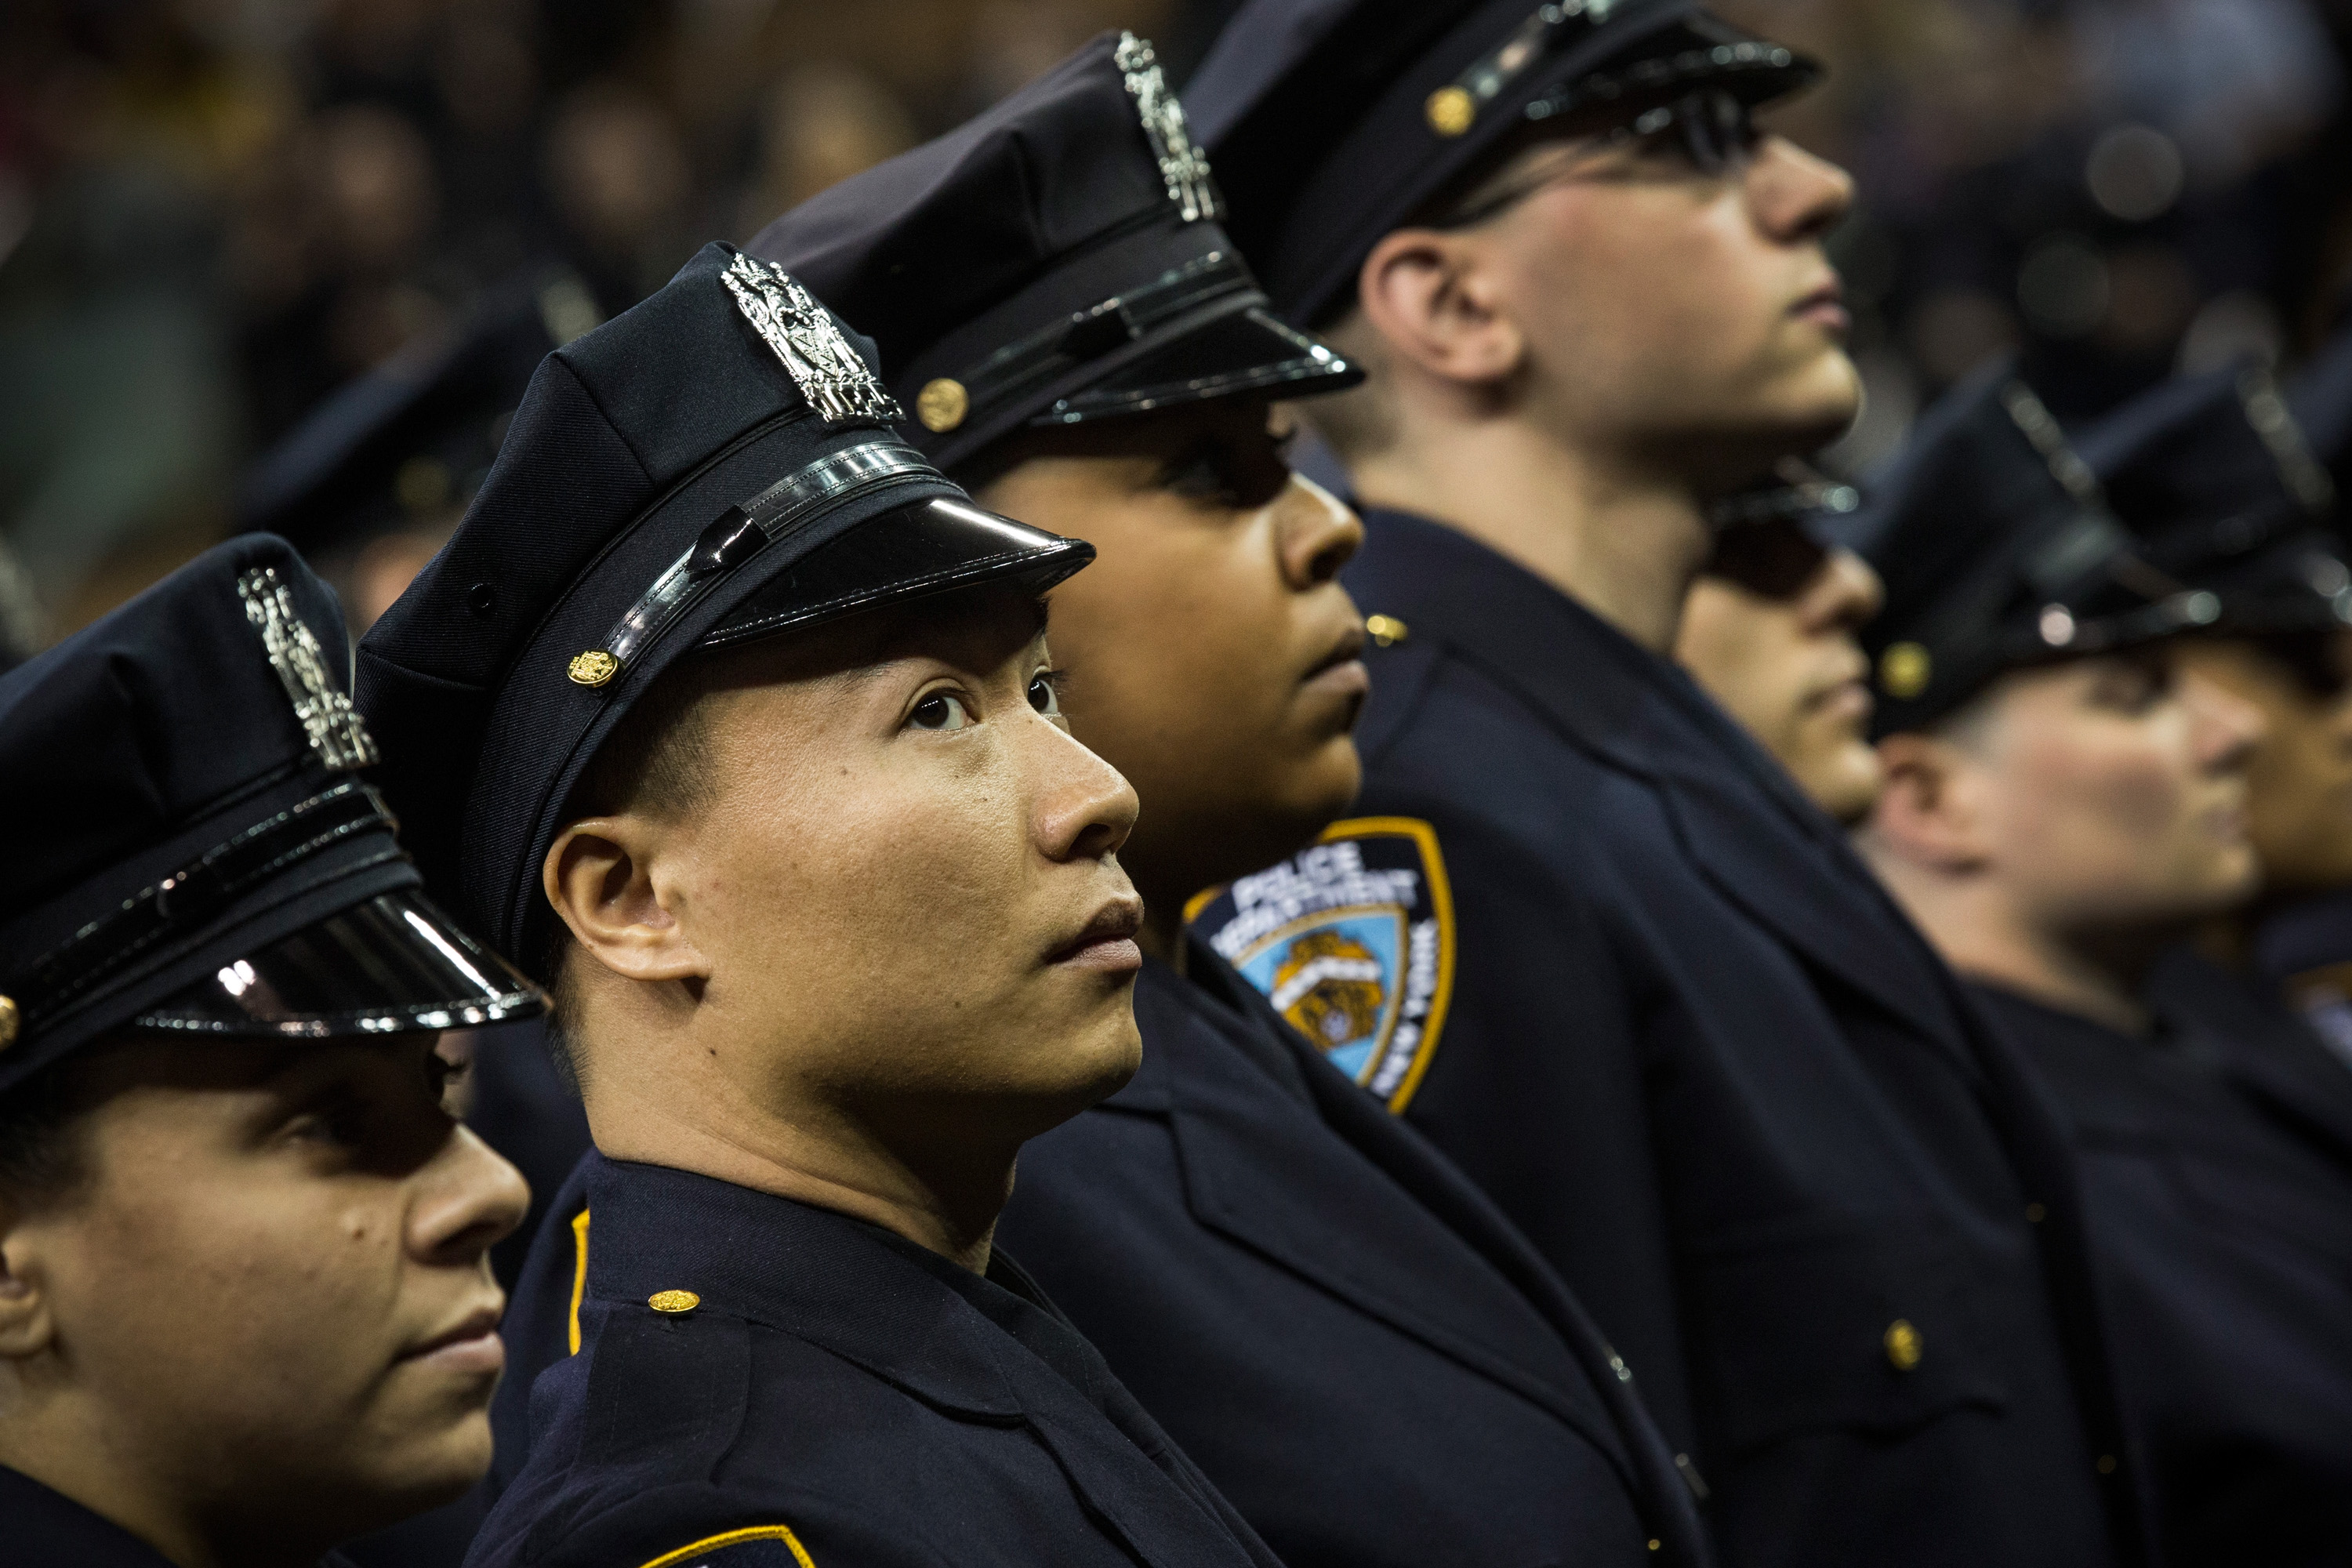 Members of the 2014 class of the New York Police Department. (Getty)